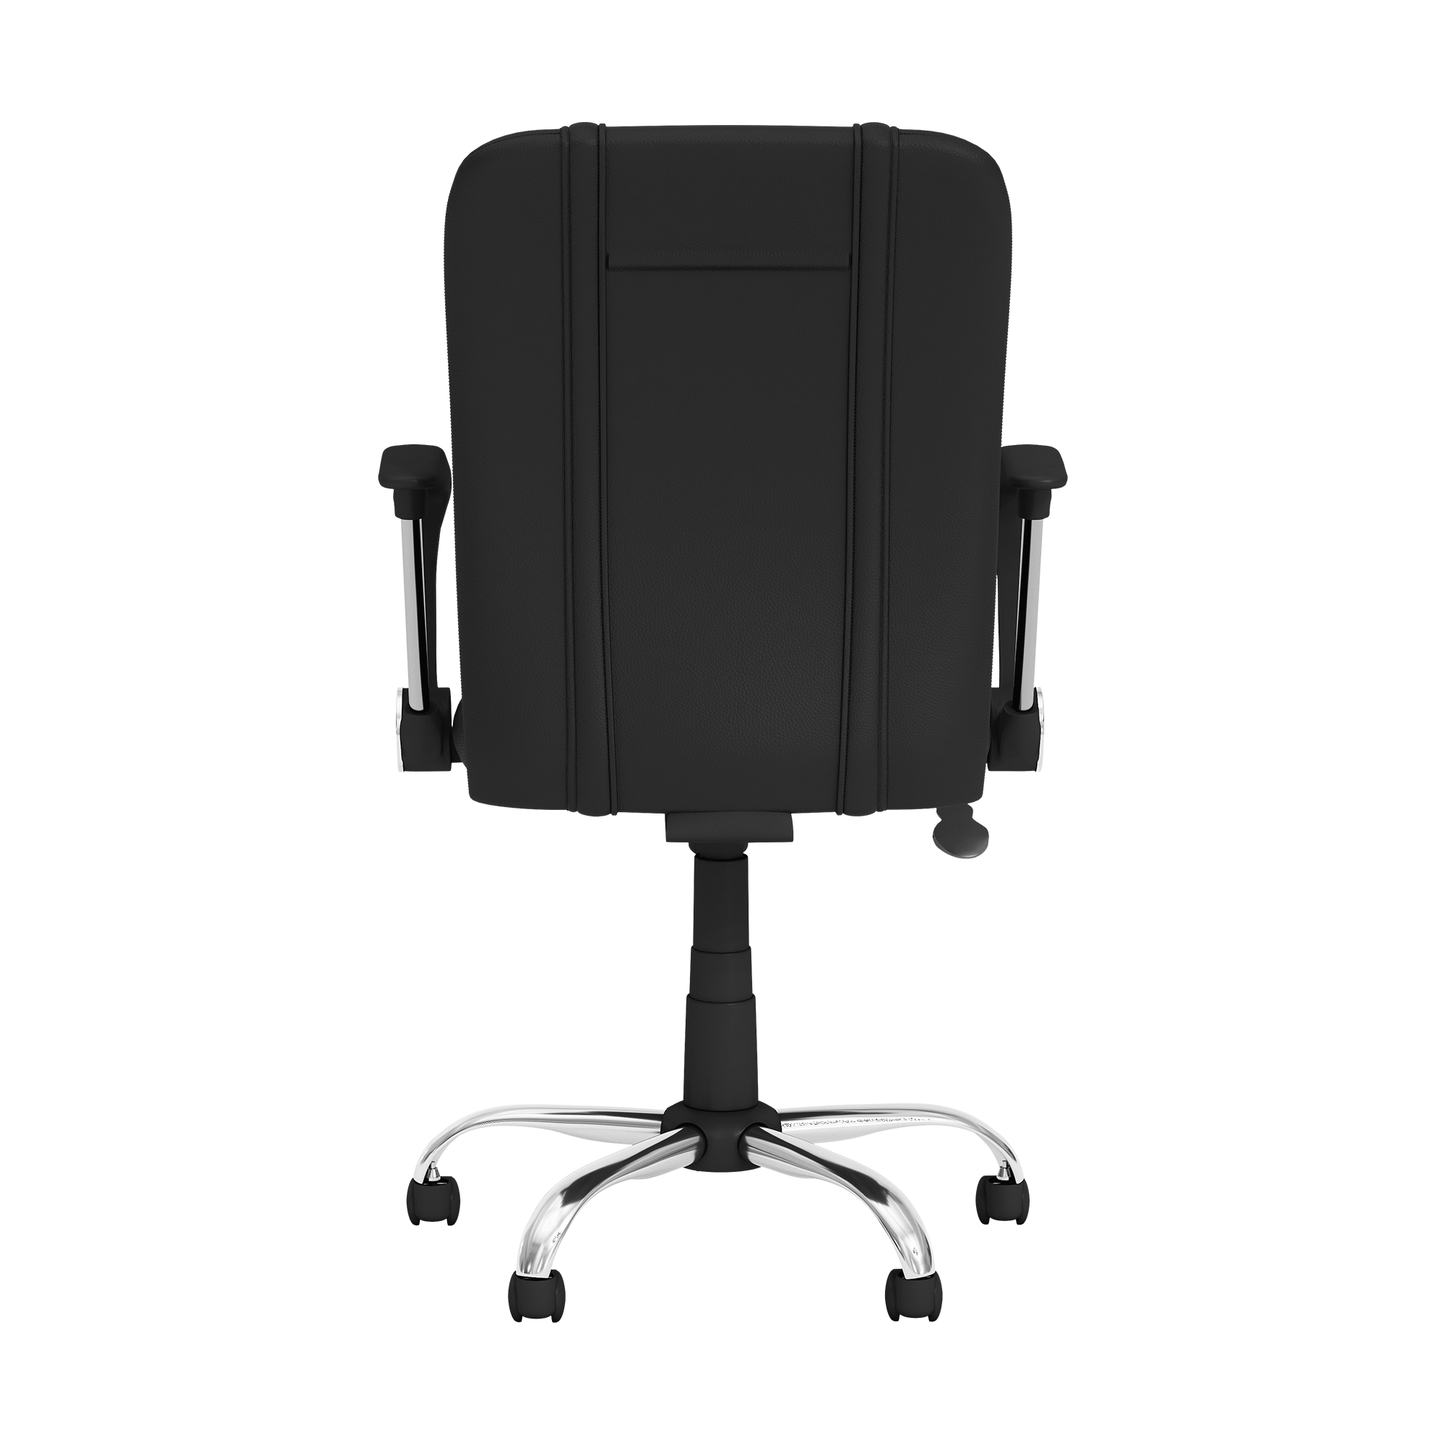 Curve Task Chair with Western Michigan Broncos Logo